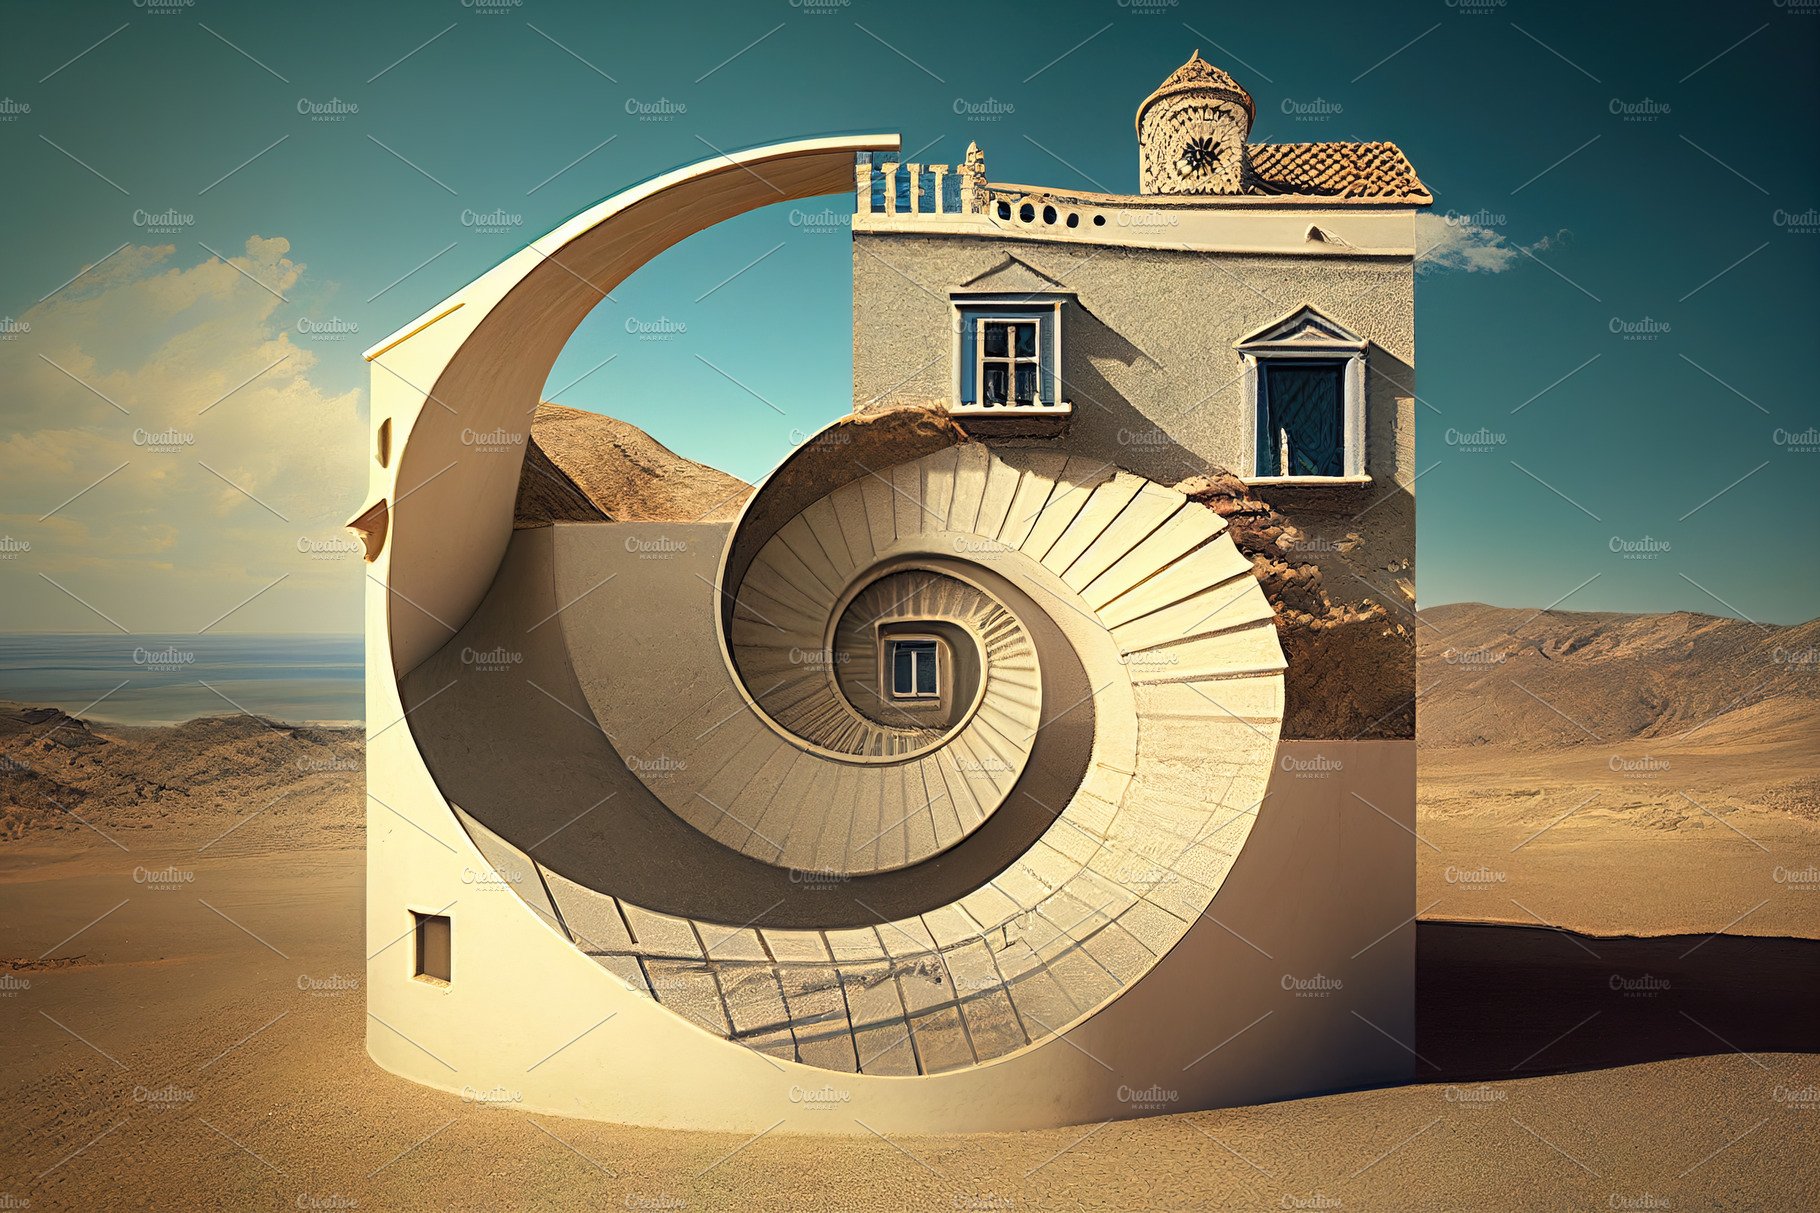 Golden Ratio and fantasy stairs cover image.